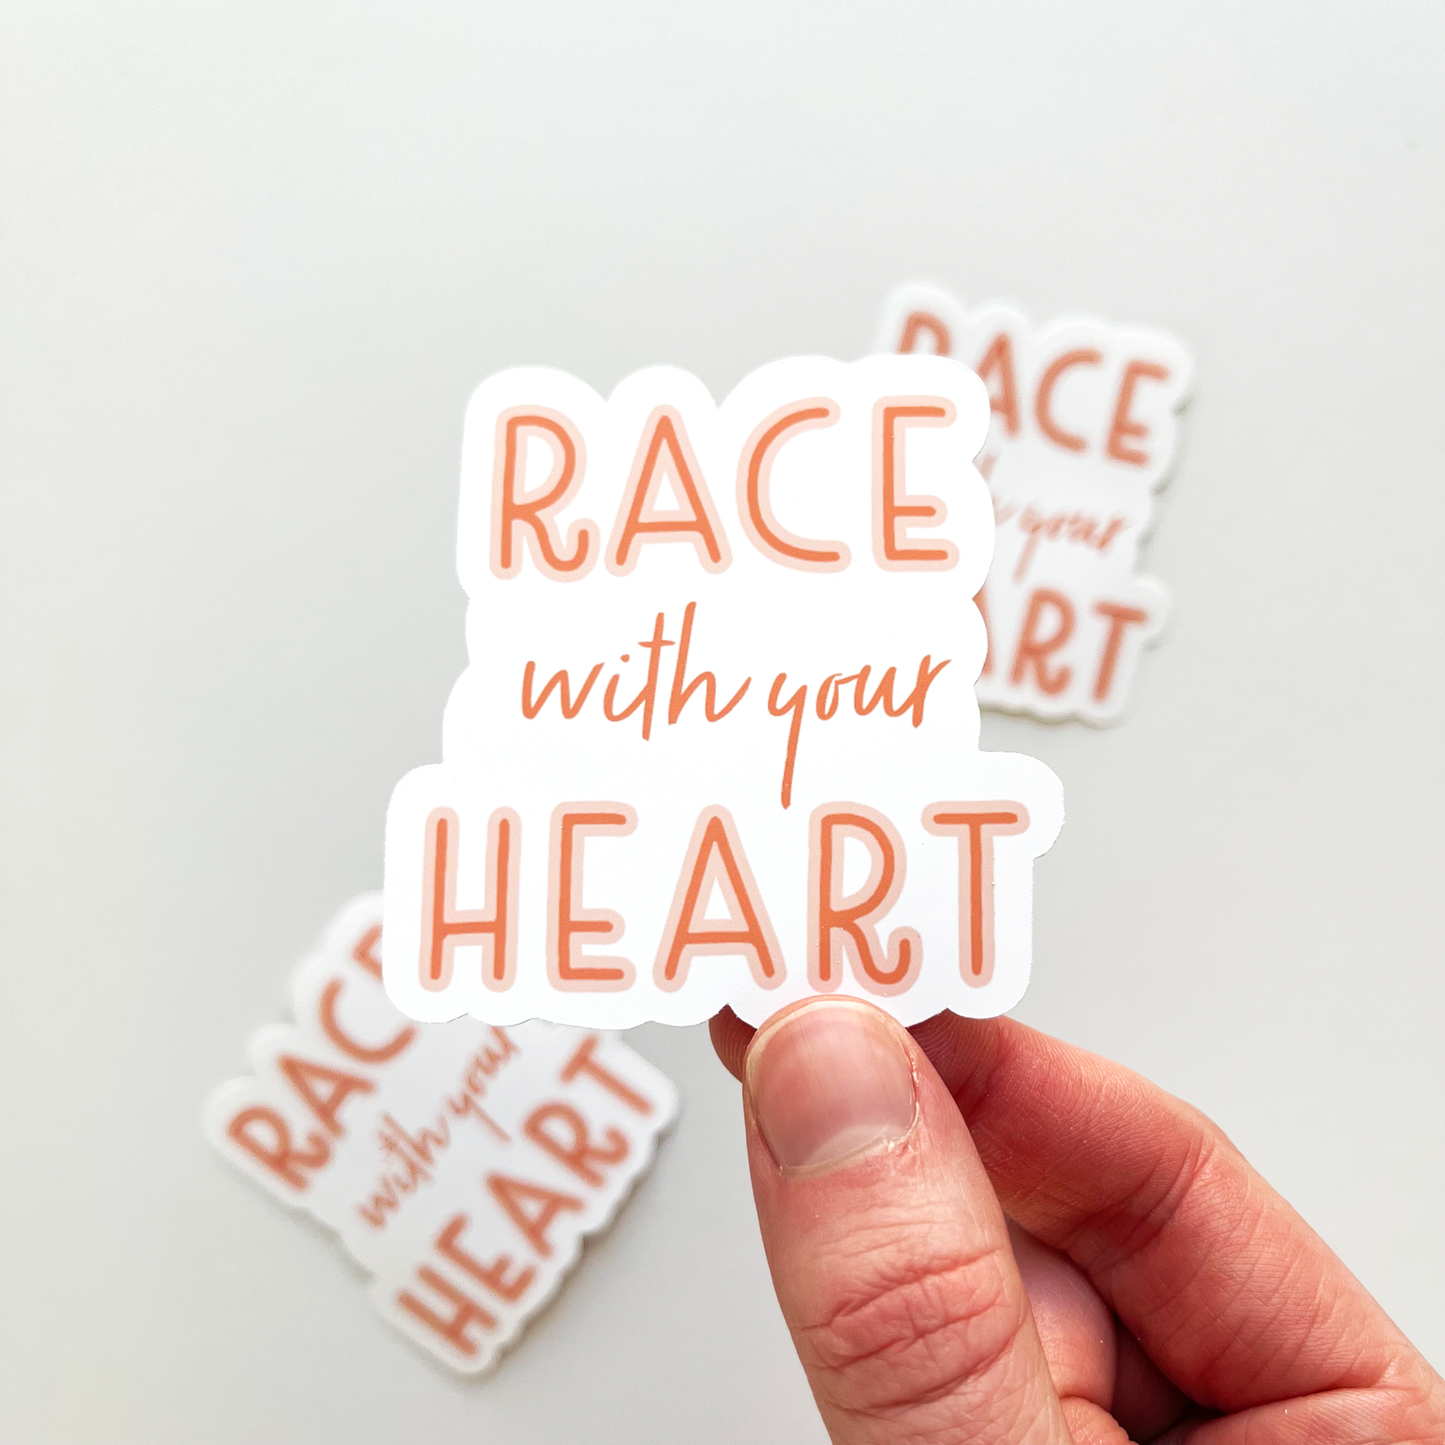 Race with your heart sticker with orange red text outlined in a lighter pink